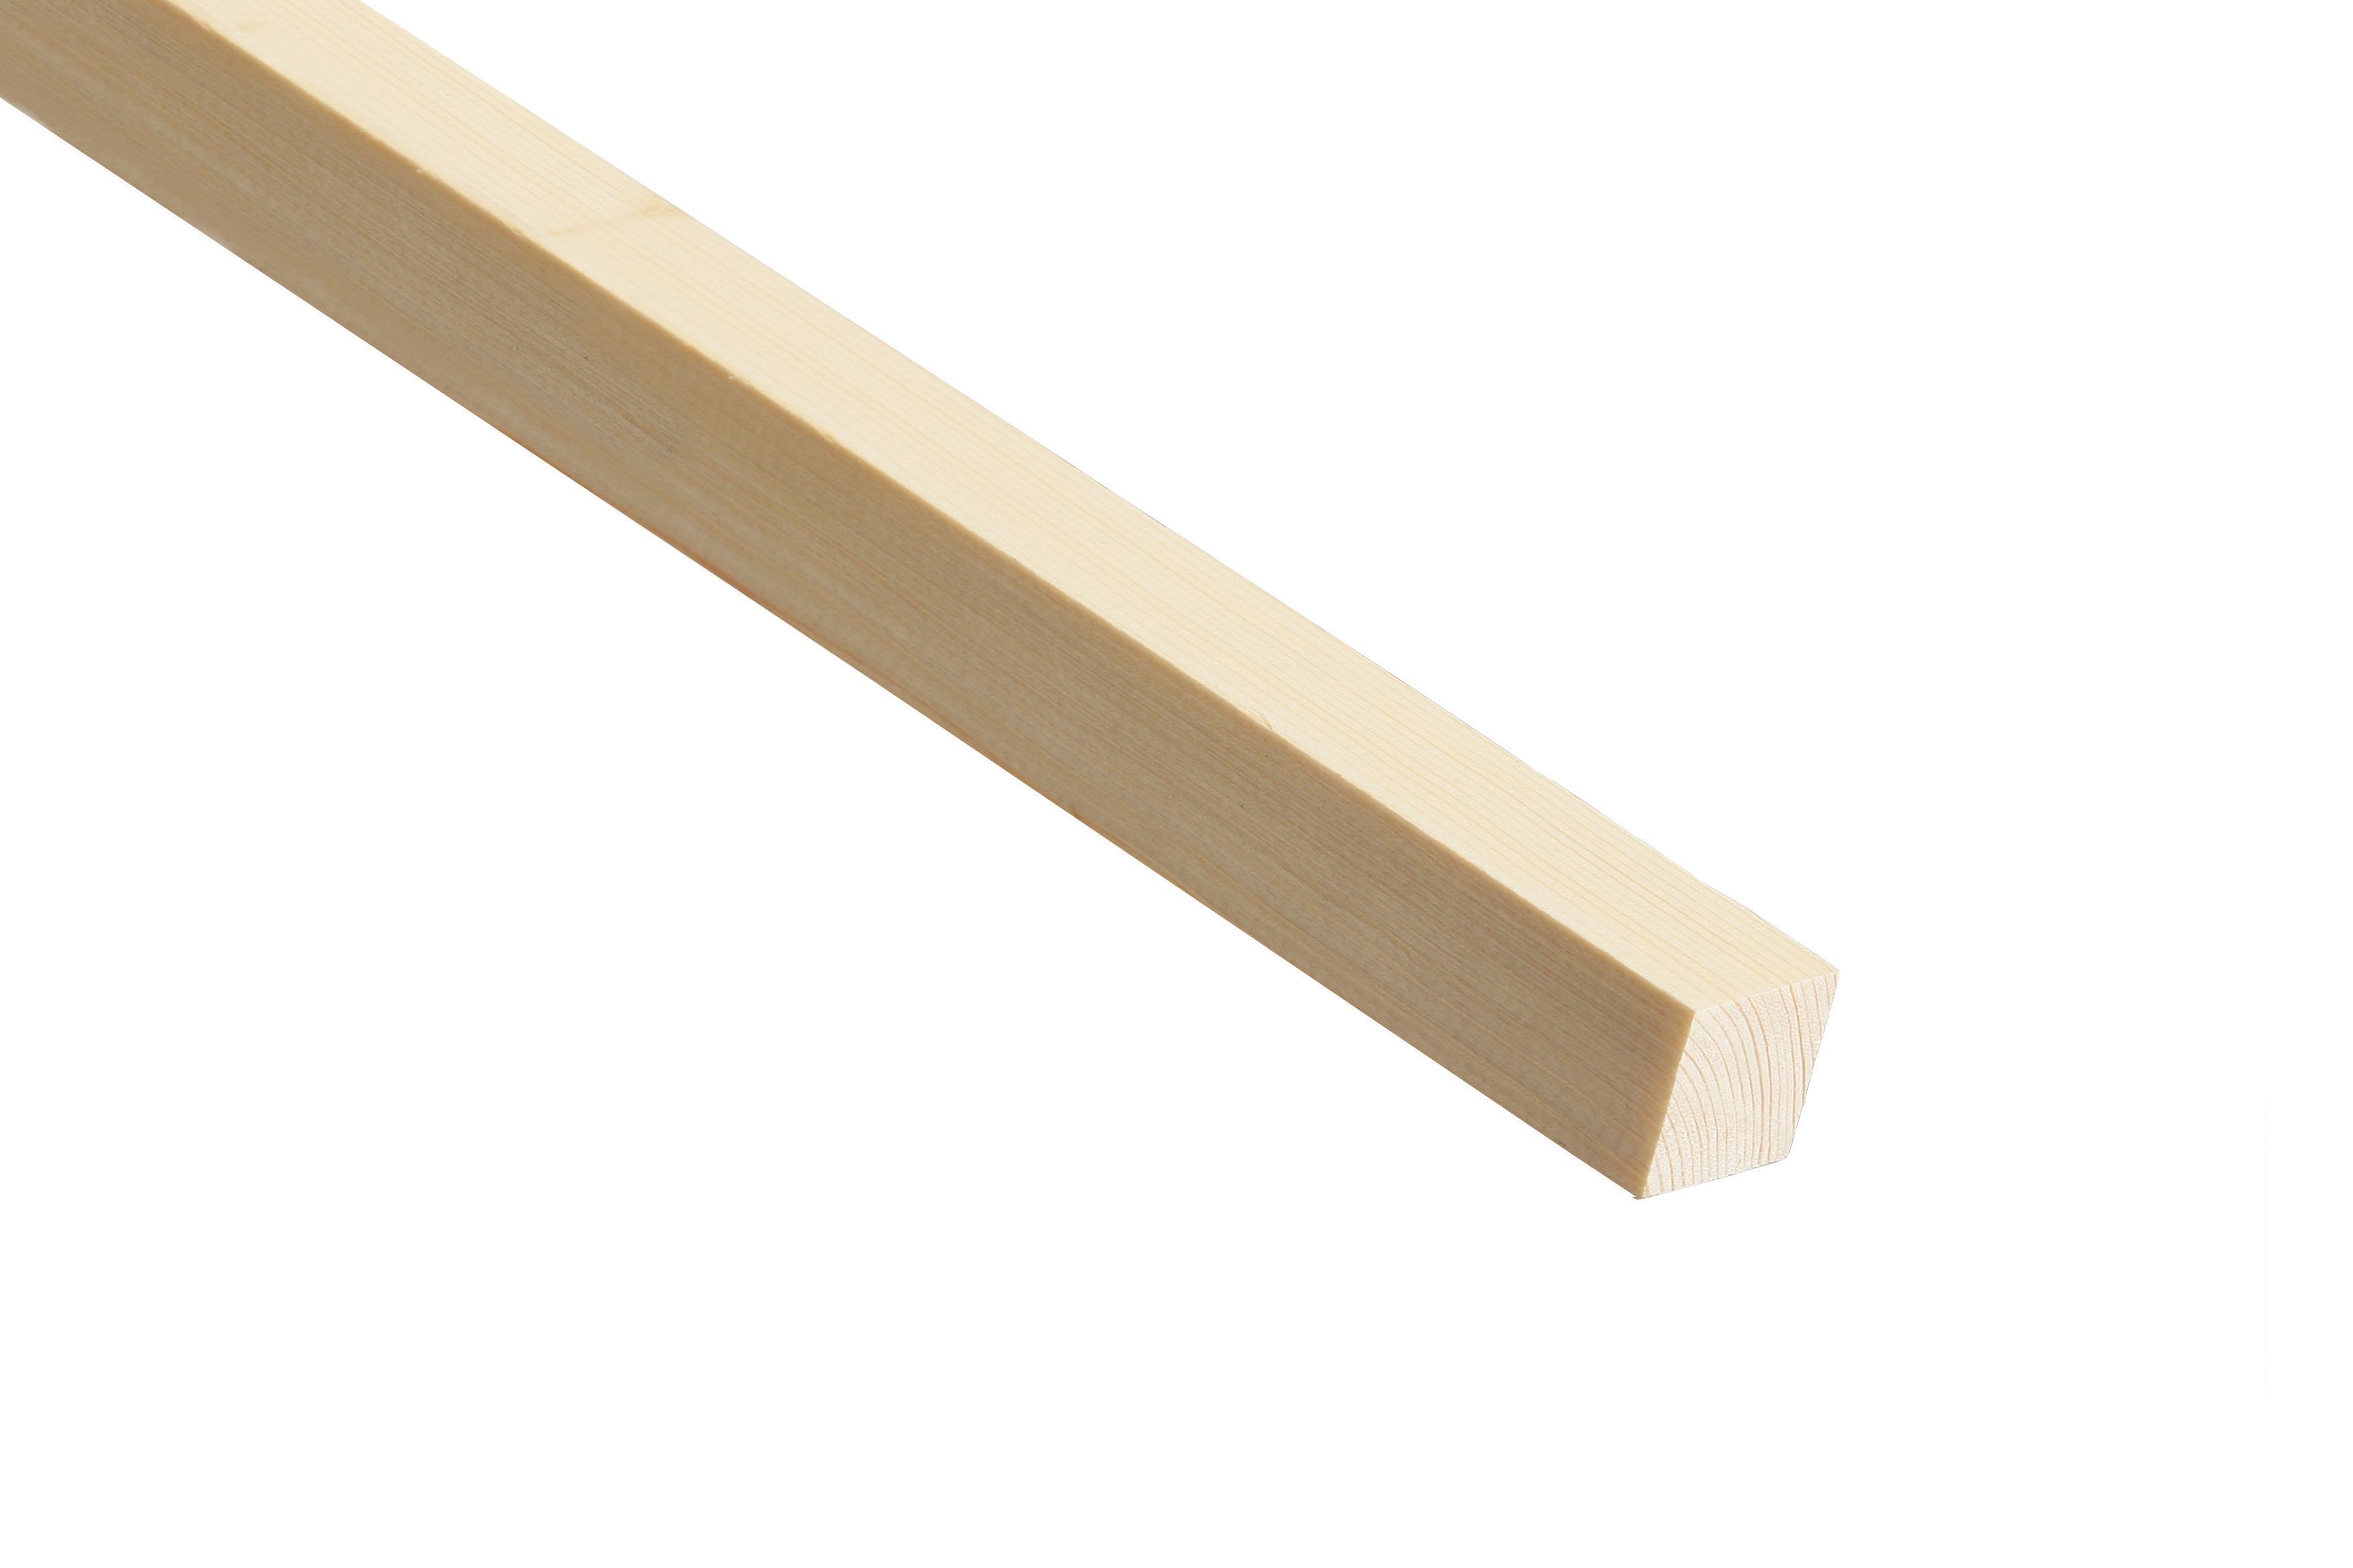 Image of Wickes Pine Stripwood Moulding (PSE) - 20 x 20 x 2400mm